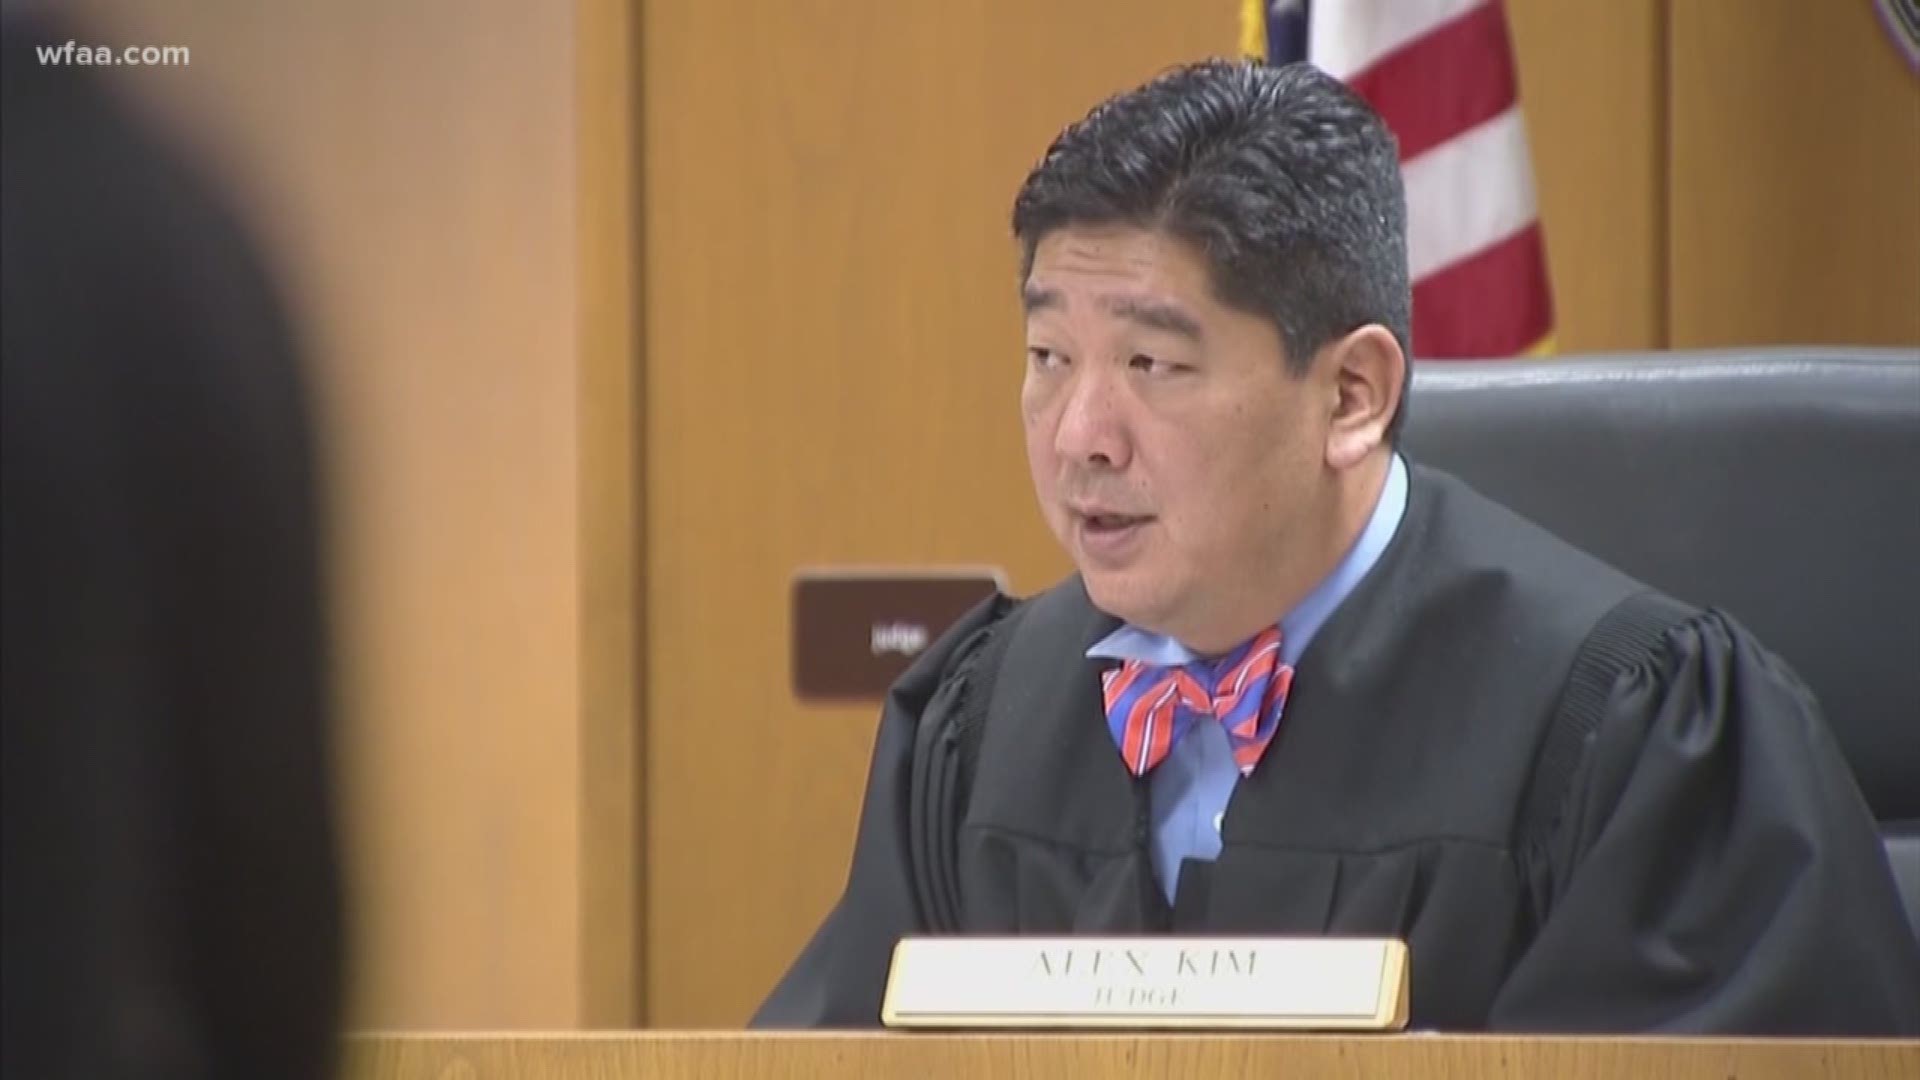 District Judge Alex Kim had been accused of ignoring the advice of CPS workers.